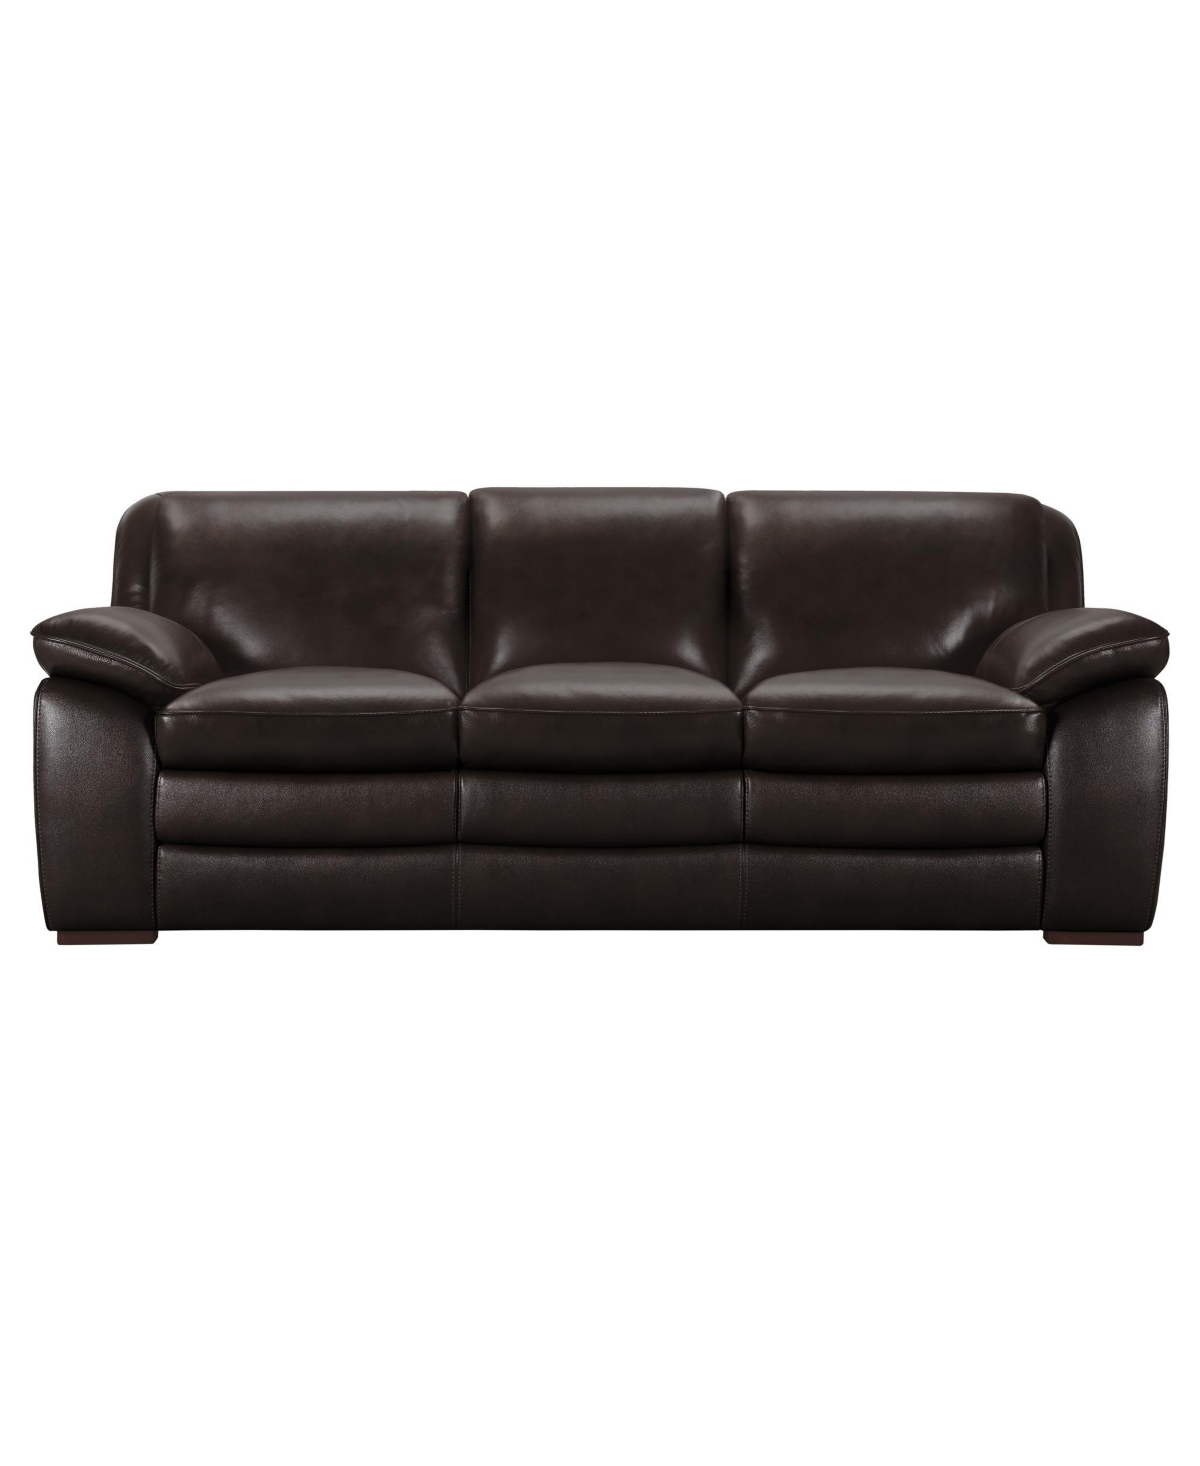 Armen Living Zanna 91" Genuine Leather With Wood Legs In Contemporary Sofa In Dark Brown